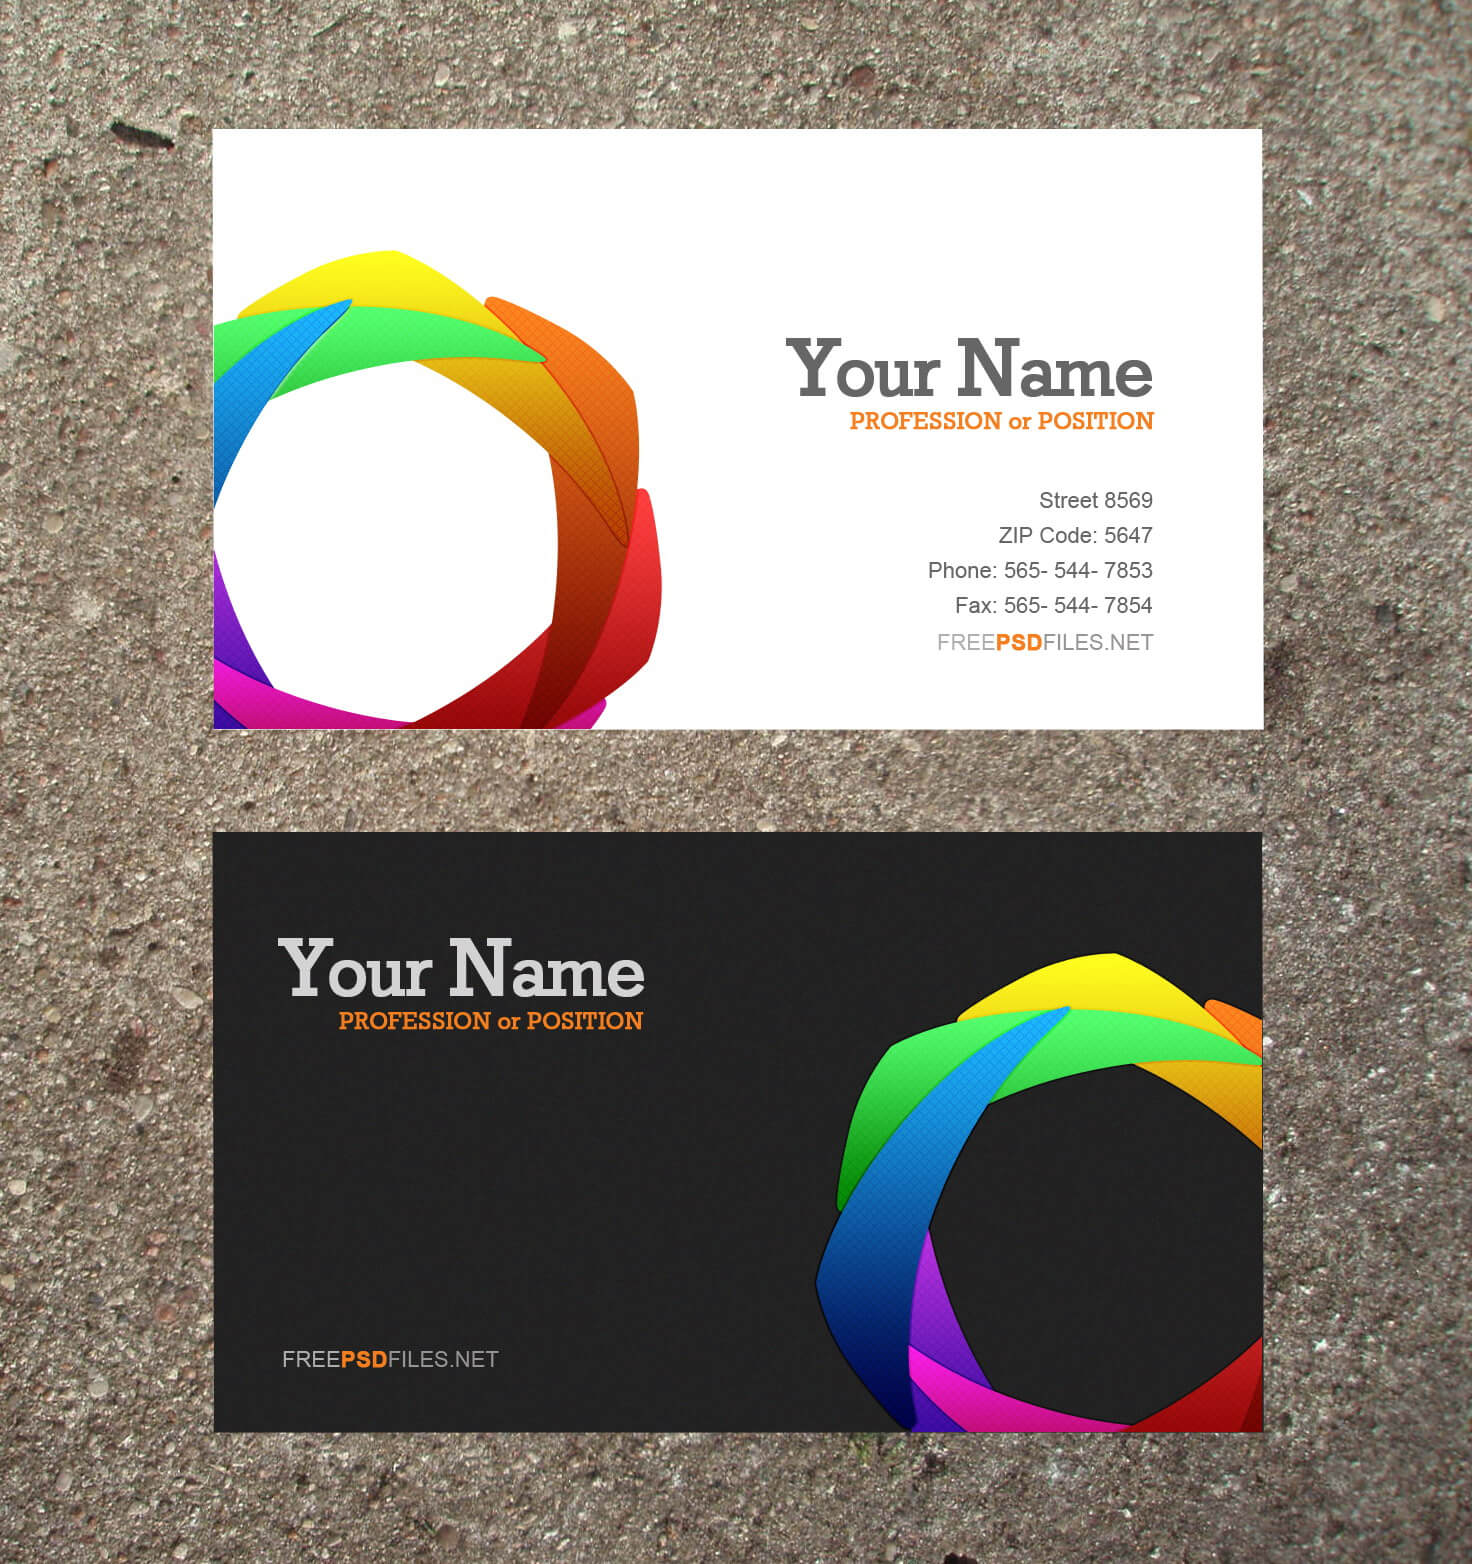 16 Business Card Templates Images – Free Business Card Regarding Business Card Template Word 2010